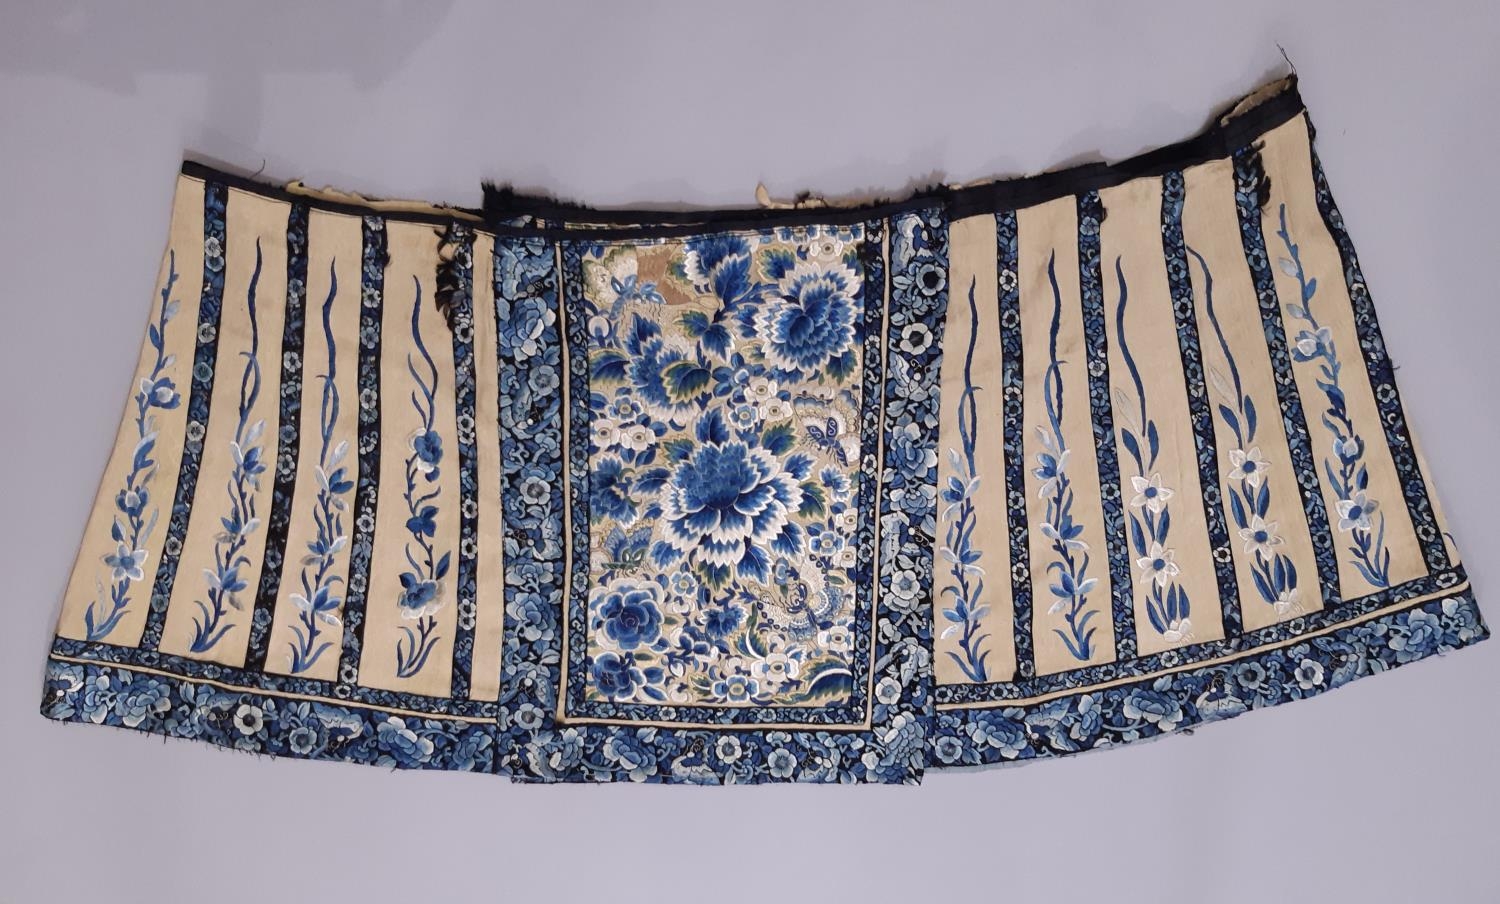 19th century Chinese lower section of skirt panel, with front sections heavily embroidered with - Image 3 of 11